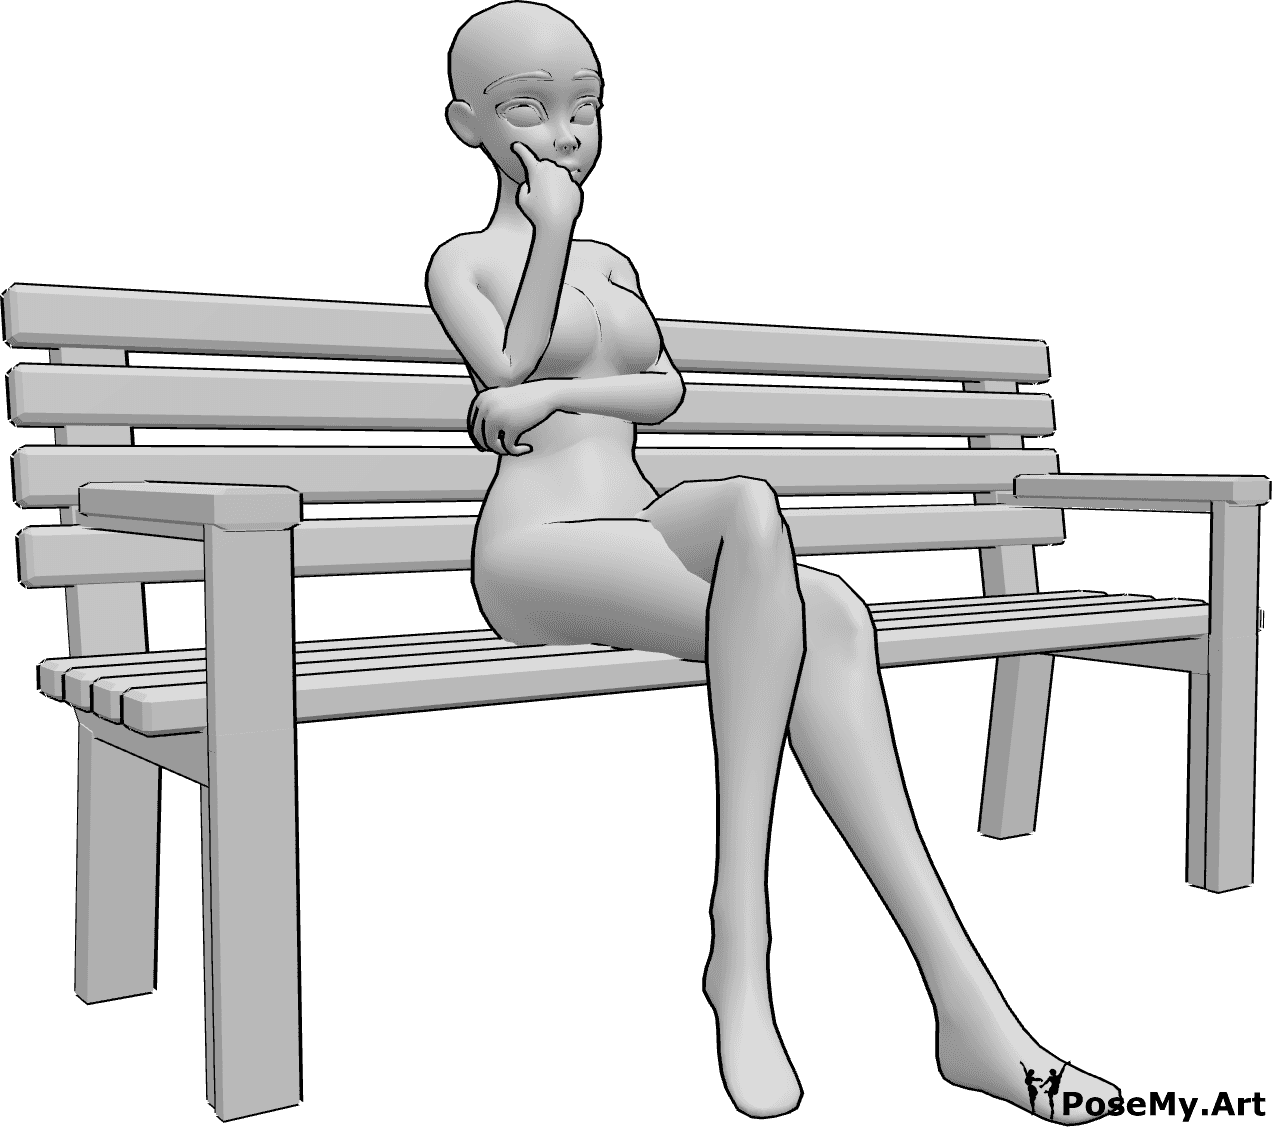 Anime girl on a bench - Other & Anime Background Wallpapers on Desktop  Nexus (Image 918852)